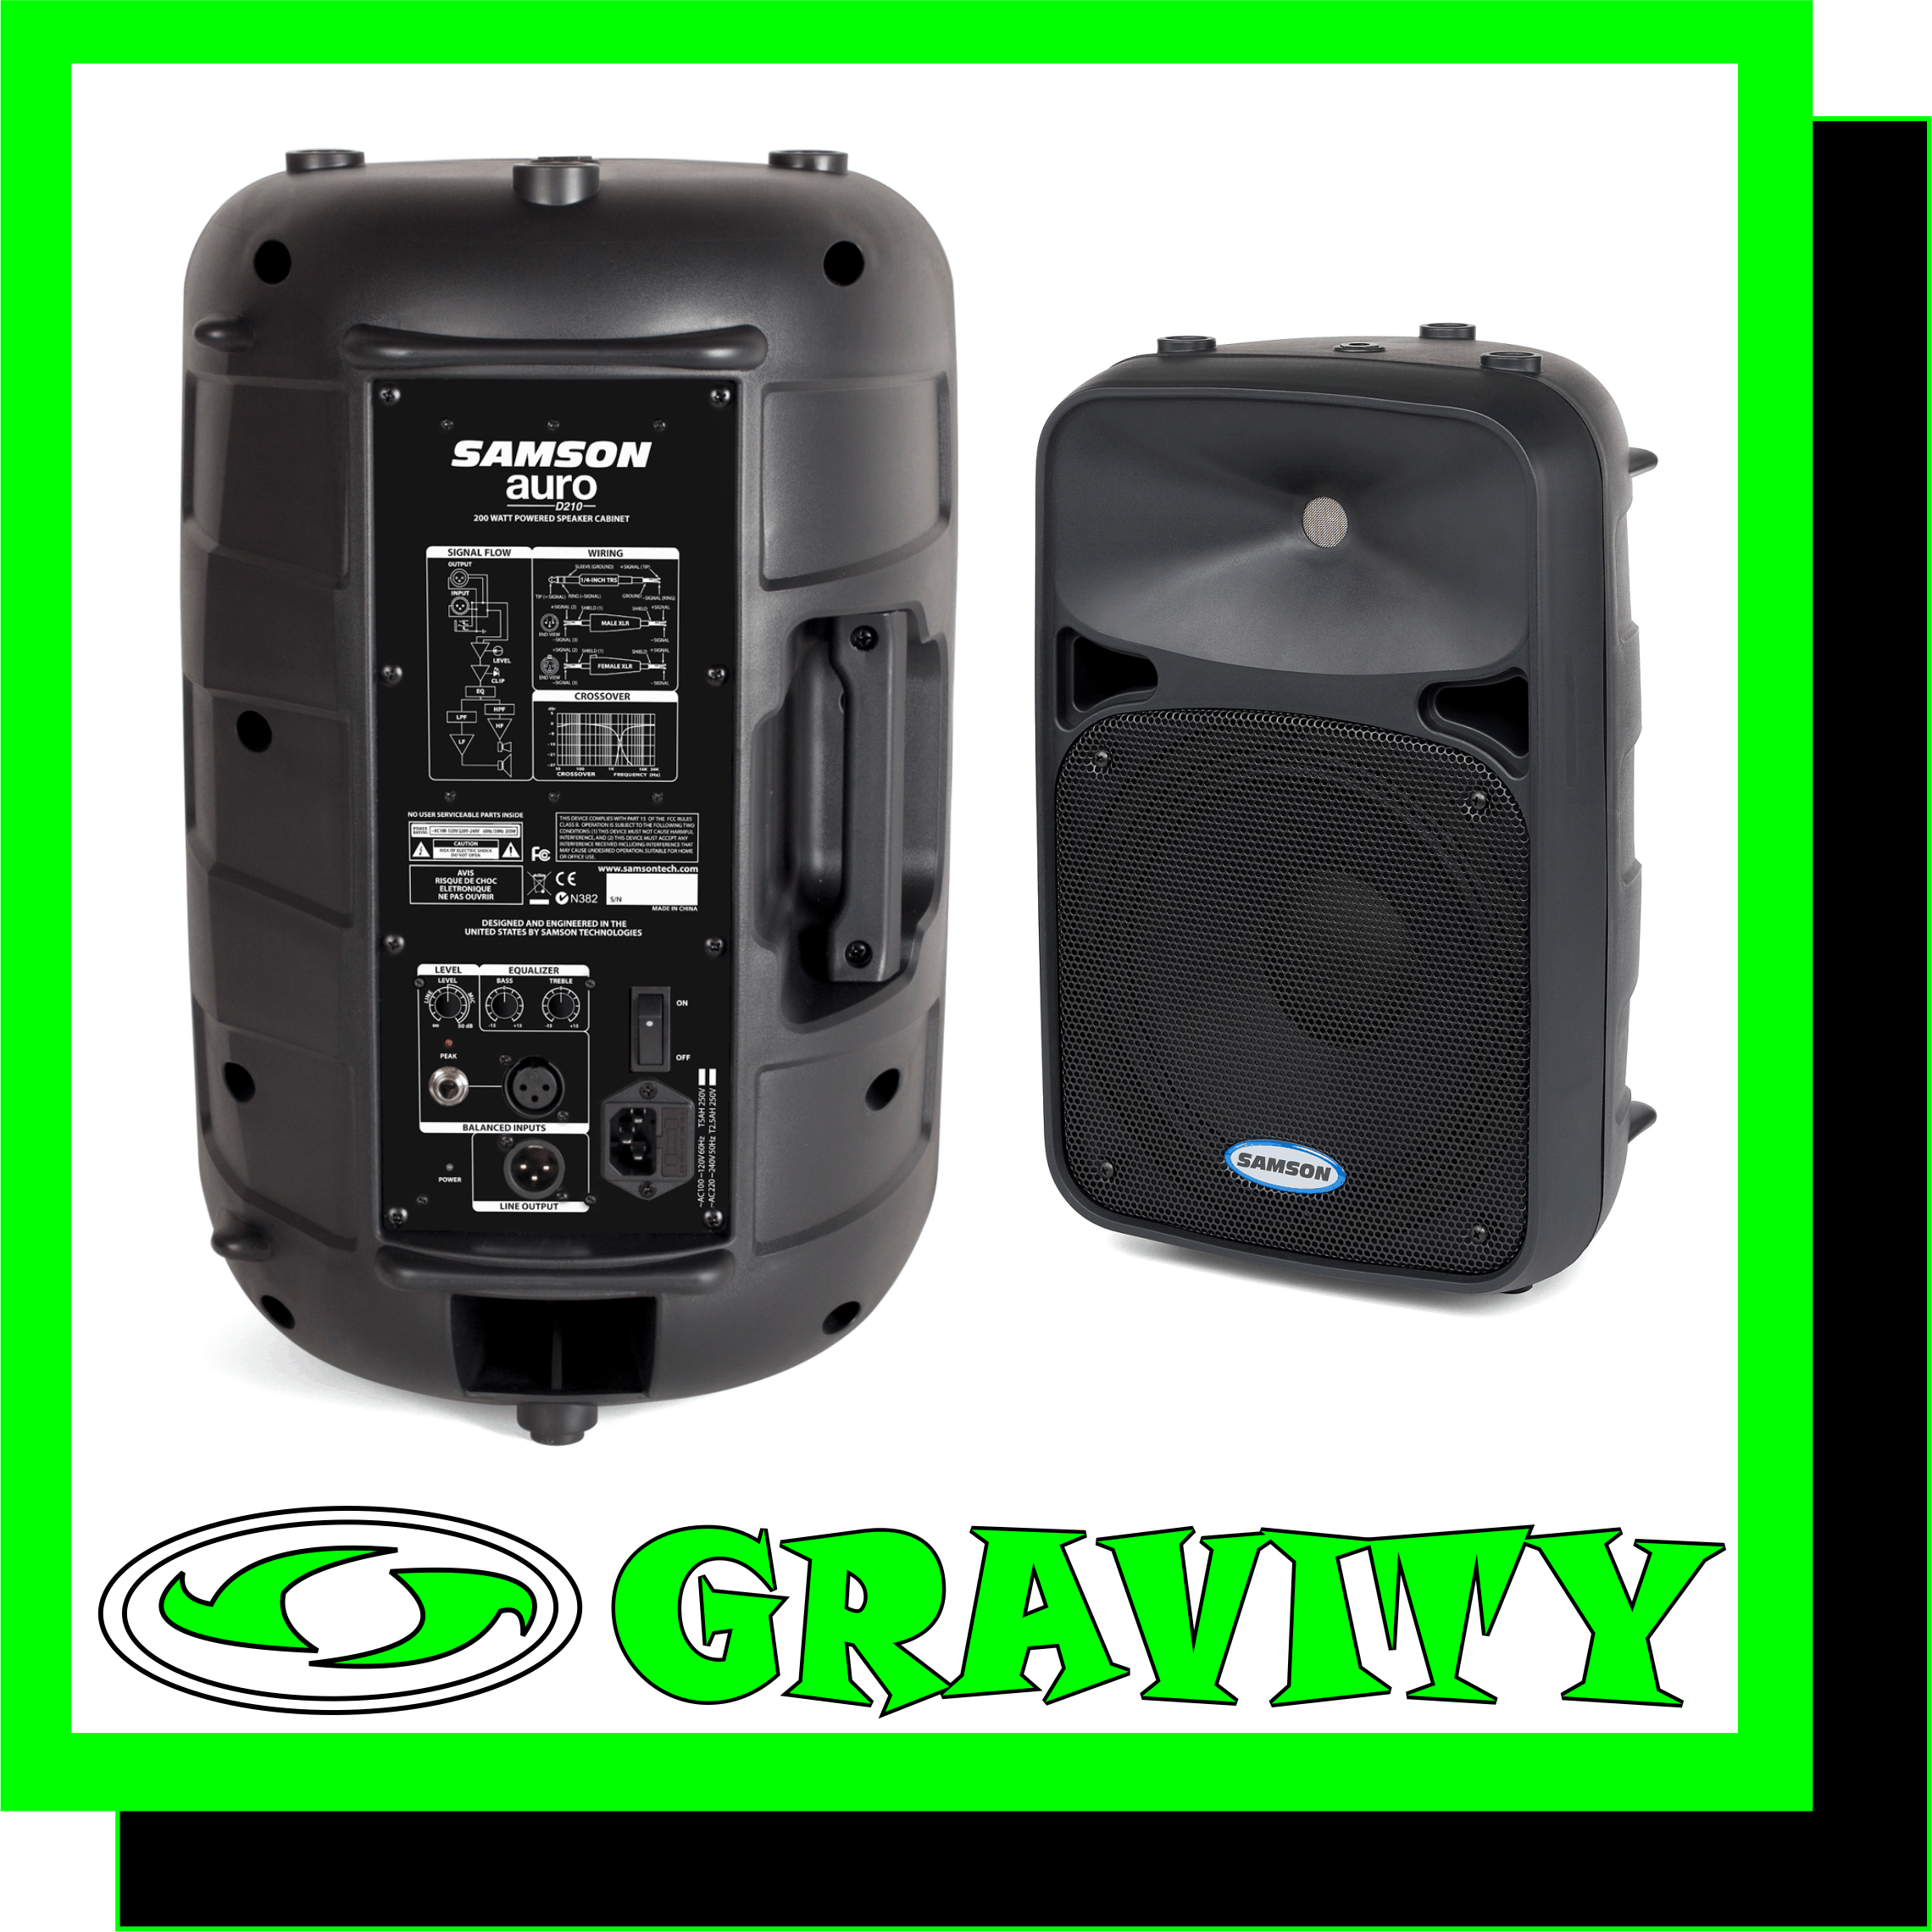 Reinforcements Have Arrived. Designed to produce the key elements of power, portability and exceptional sound, Samson's Auro D210 2-Way Active Loudpeaker is a compact enclosure that combines superior components and meticulous engineering. Ideal for installation purposes, gigging musicians and general live sound reinforcement applications, Auro D210 provides a versatile speaker solution that integrates easily into PA setups.  Auro D210 features a conveniently lightweight Class D design, producing 200 watts of onboard power via its 10" extended low frequency driver and accompanying 1" compression driver. Compact yet resilient, this loudspeaker support immersive, articulate bass and sweet, lucid highs for well-balanced and expressive audio suitable for any situation where pro-quality sound is a must.  For additional versatility, this speaker features a Mic/Line input with Volume control and Clip LED. Also, a Line output allows for the linking of multiple speakers. Auro D210 features a 1 3/8" pole mount receptacle and floor monitor positioning options for flexible setup.   -Compact, lightweight Class D 2-way active loudspeaker -10" extended range low frequency driver -1" compression driver with 1" exit -200 watts of output power -Mic/Line input with Volume control and Clip LED -Additional Line output allows linking of multiple speakers -1 3/8" pole mount receptacle -Floor monitor positioning options